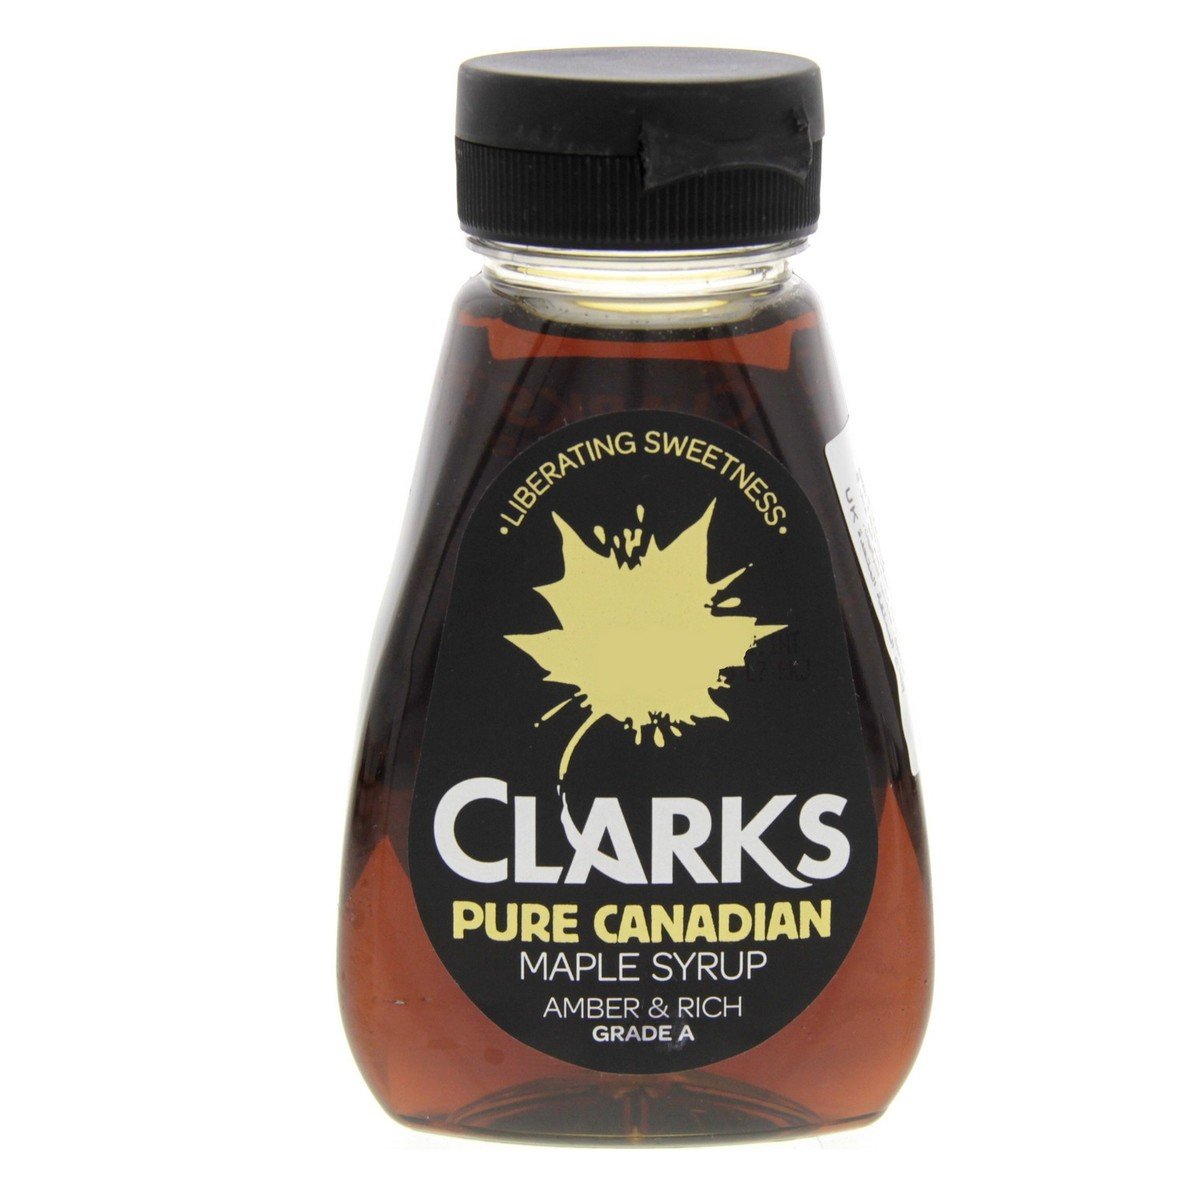 Foster Clarks Clarks Pure Canadian Maple Syrup 180ml